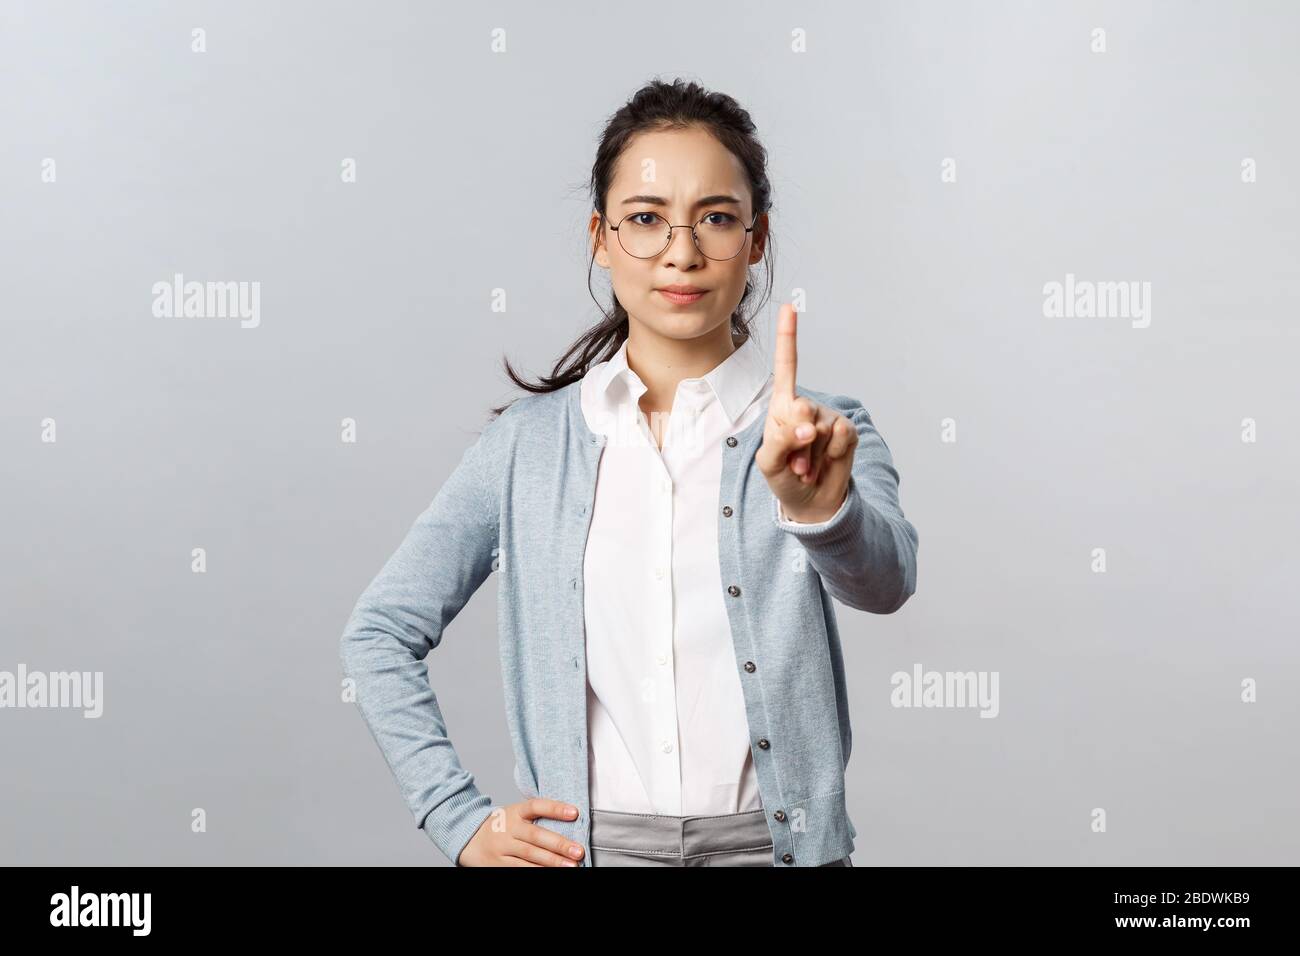 People, emotions and lifestyle concept. Strict, serious-looking asian woman, teacher scolding student talking during classes or cheating on exam Stock Photo